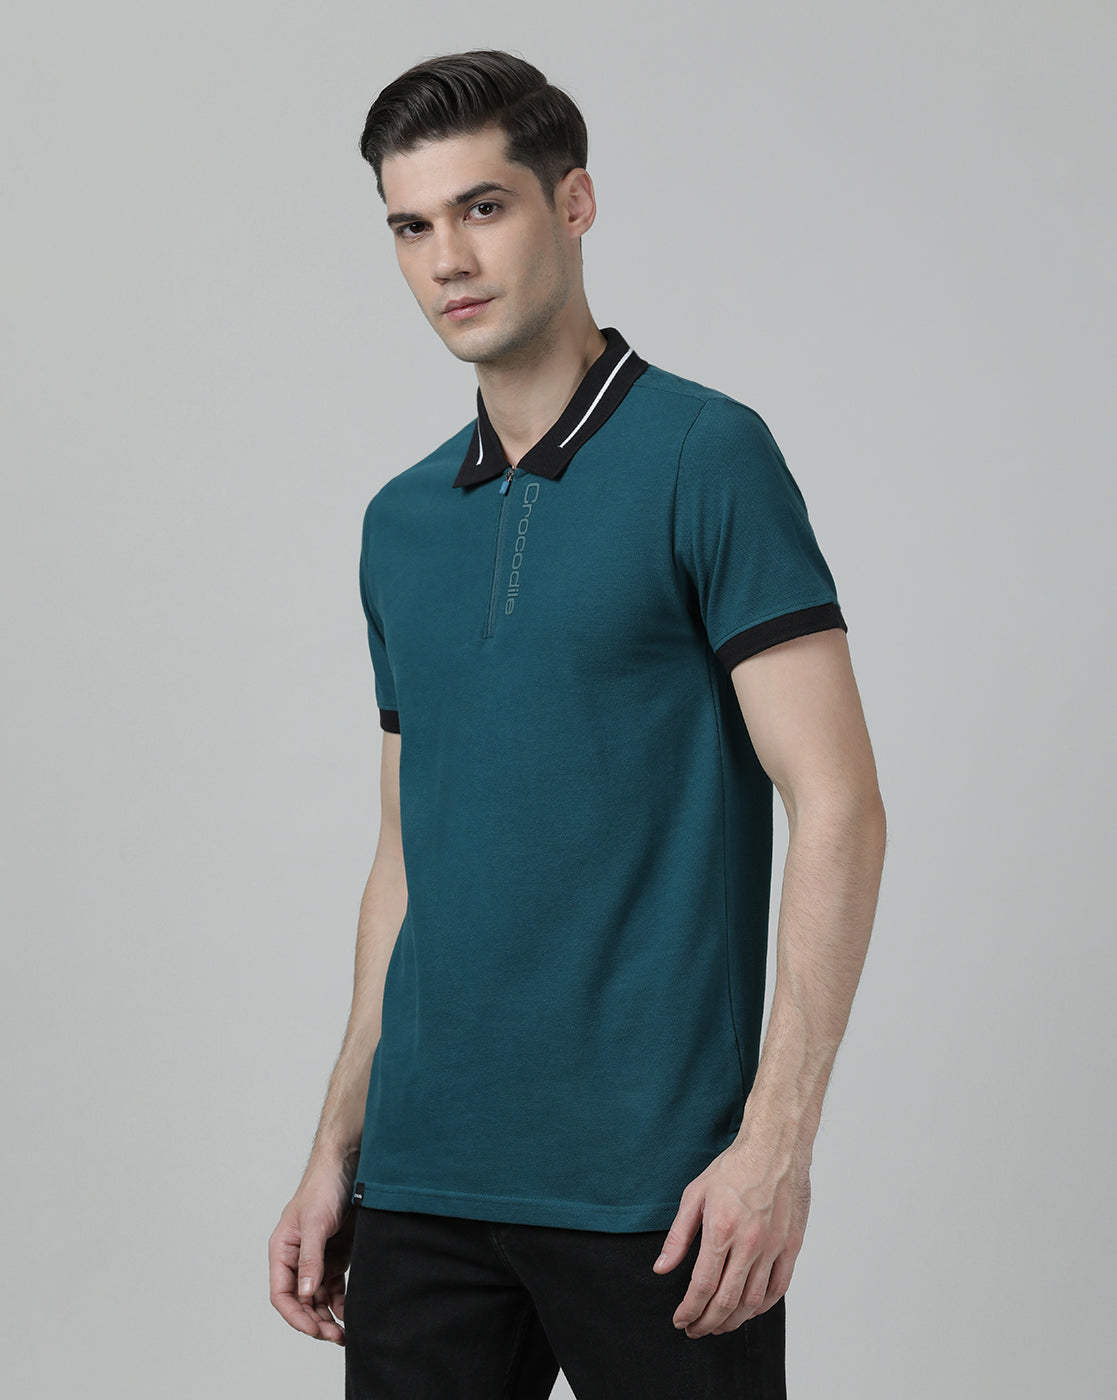 Casual Solid Printed Slim Fit Half Sleeve Teal Polo T-shirt with Collar